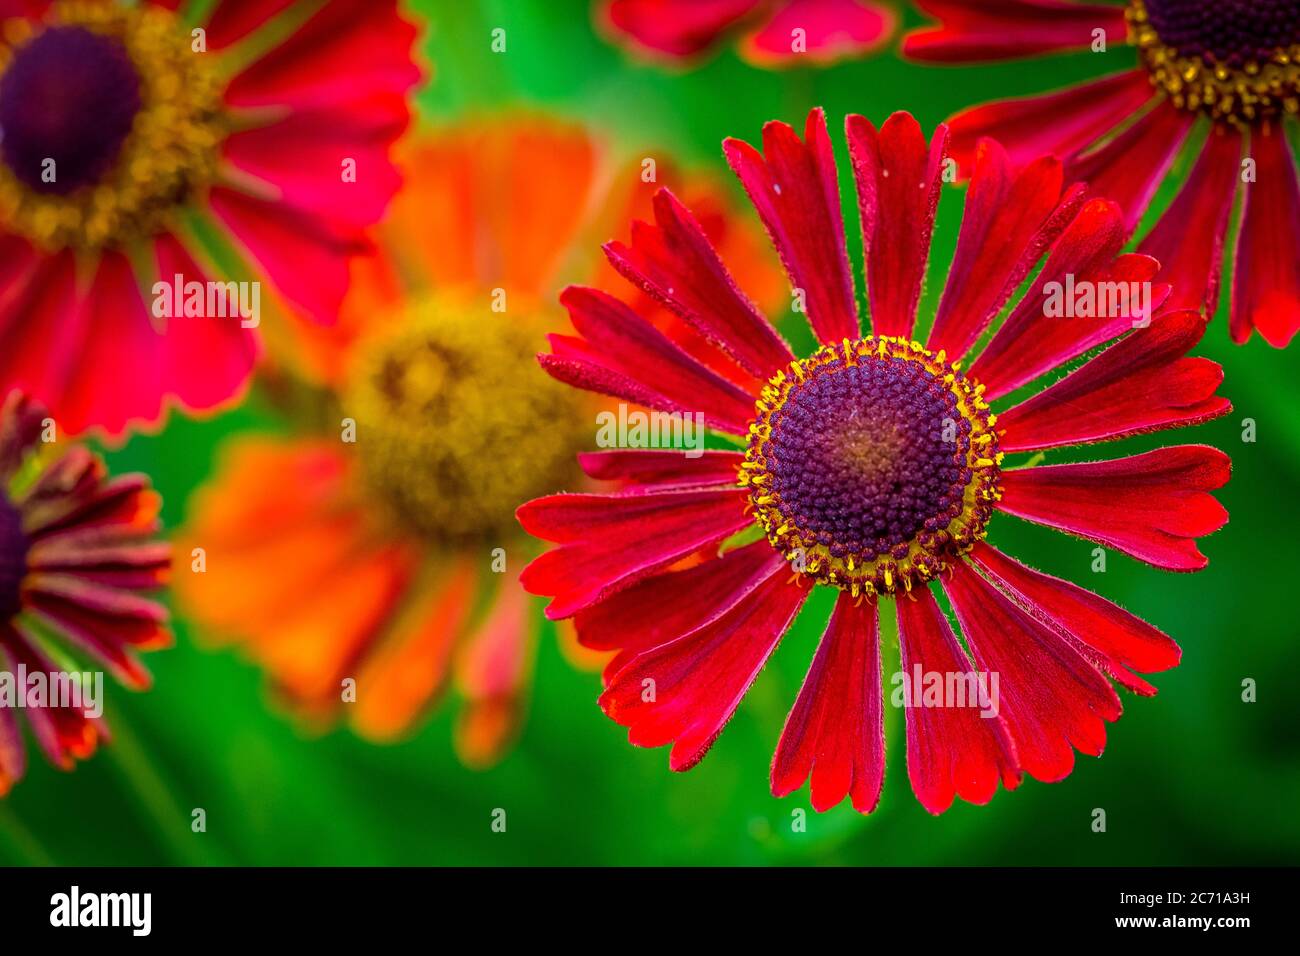 Closeup macro shot of the intricate details of some beautiful red Helenium flower blooms growing in the garden. Stock Photo